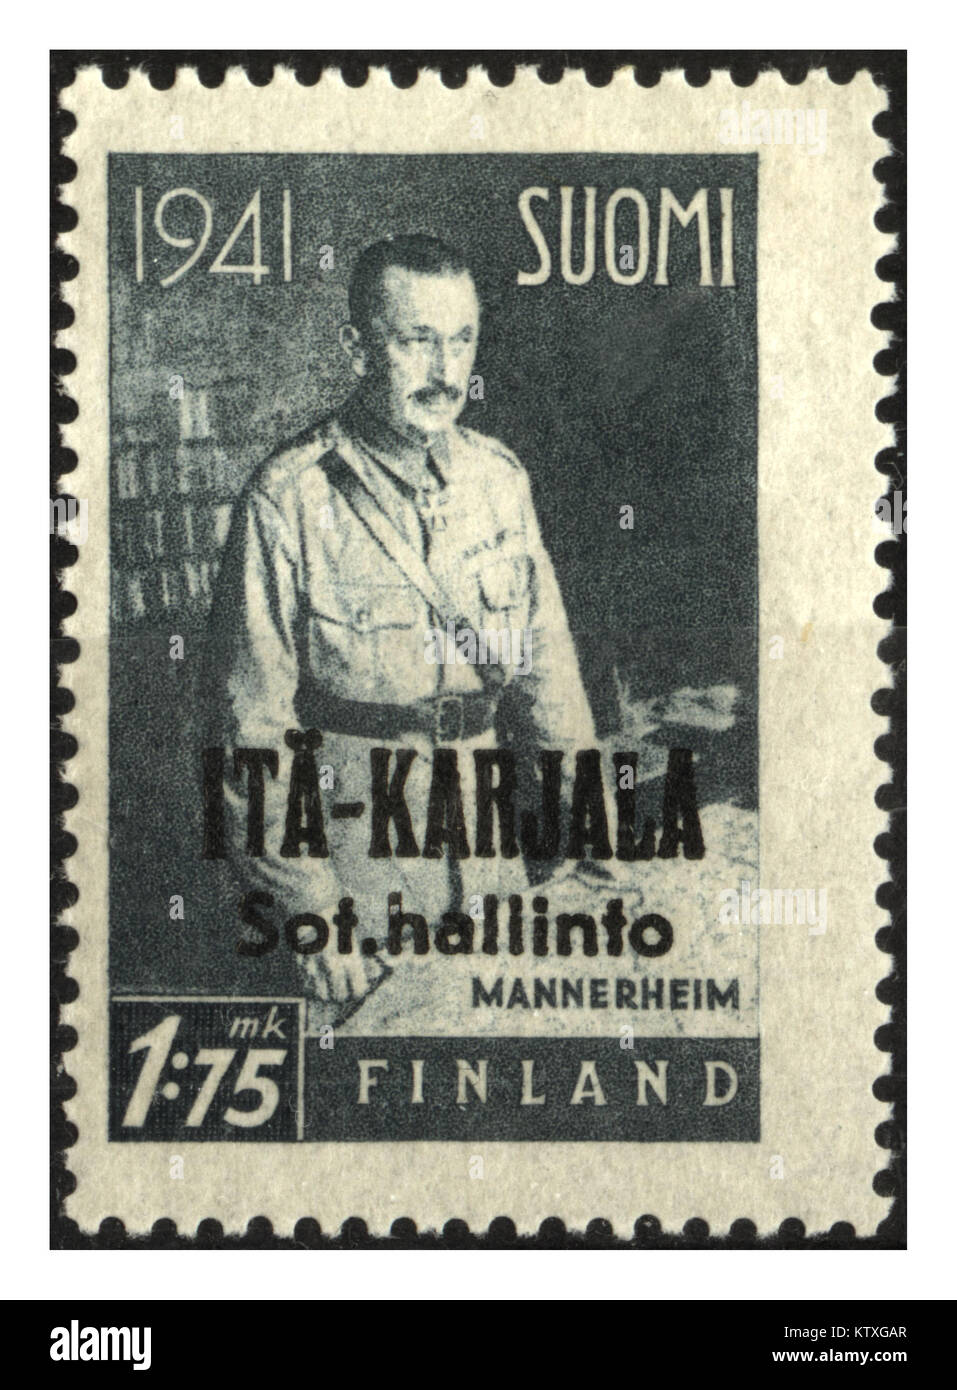 1941 WW2 Finnish stamp featuring Gustav Mannerheim the wartime leader and hero of the Finnish people and Finland Stock Photo